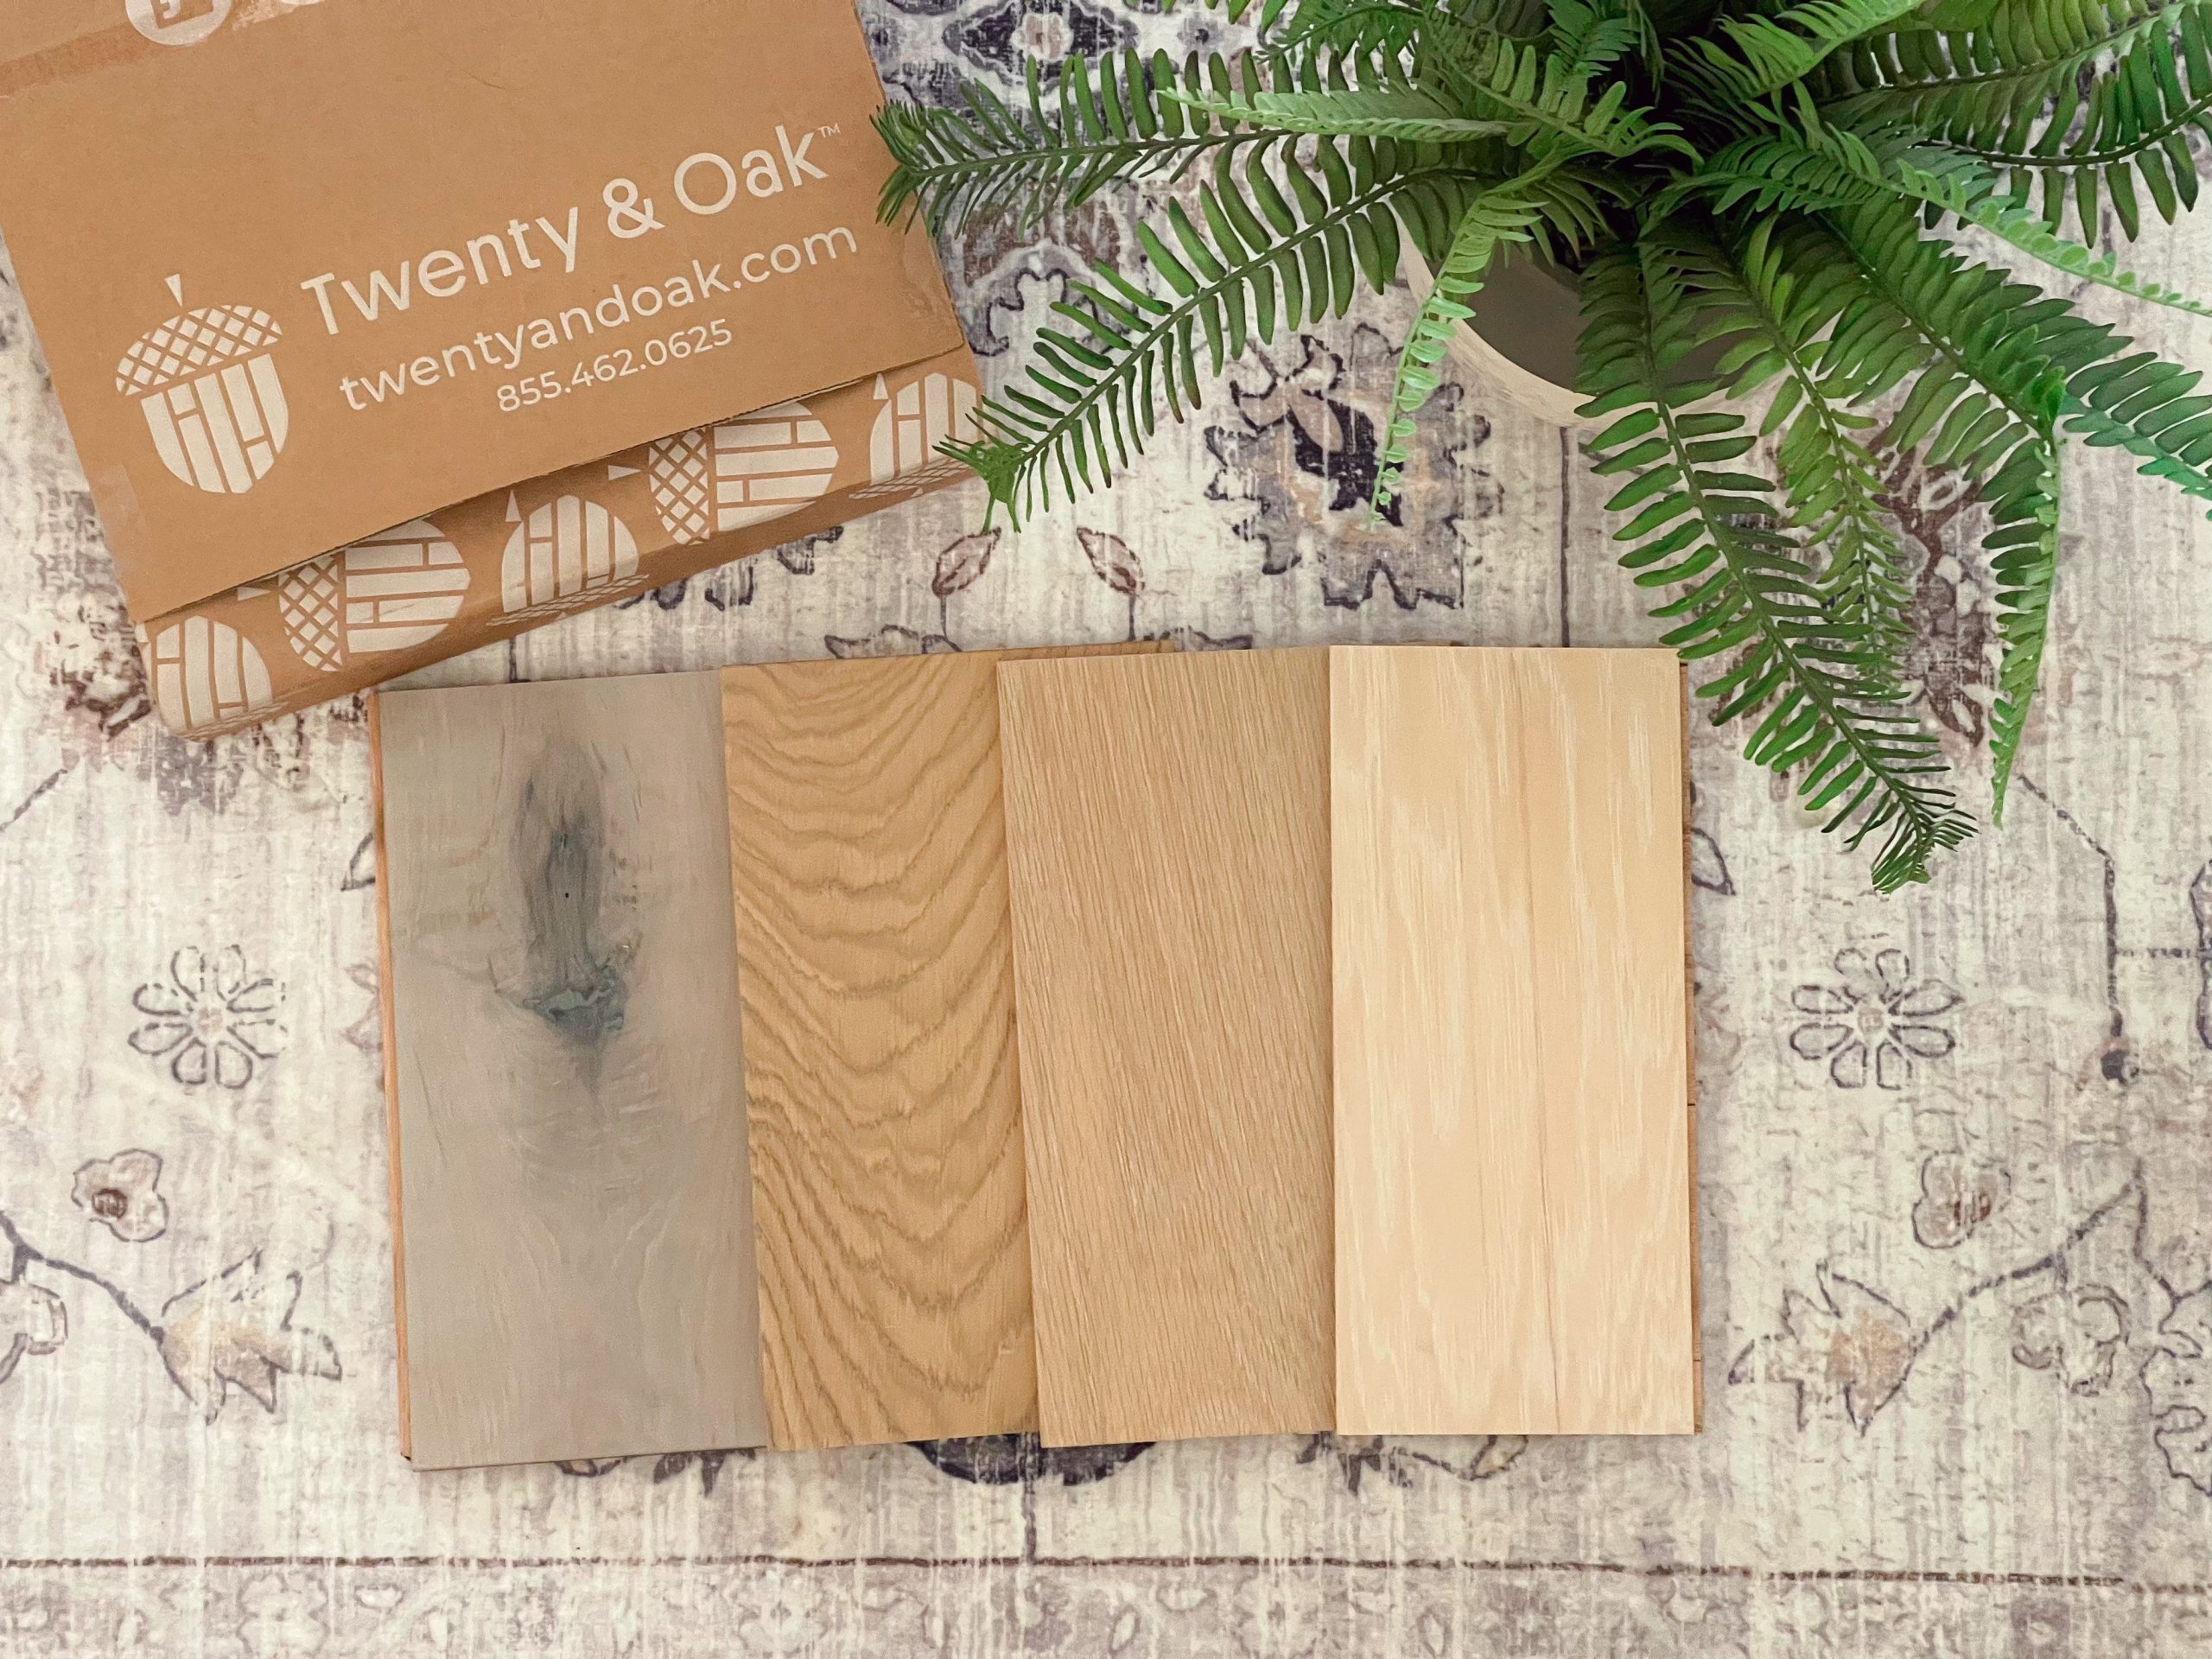 Choosing Flooring for our New Home with Twenty & Oak